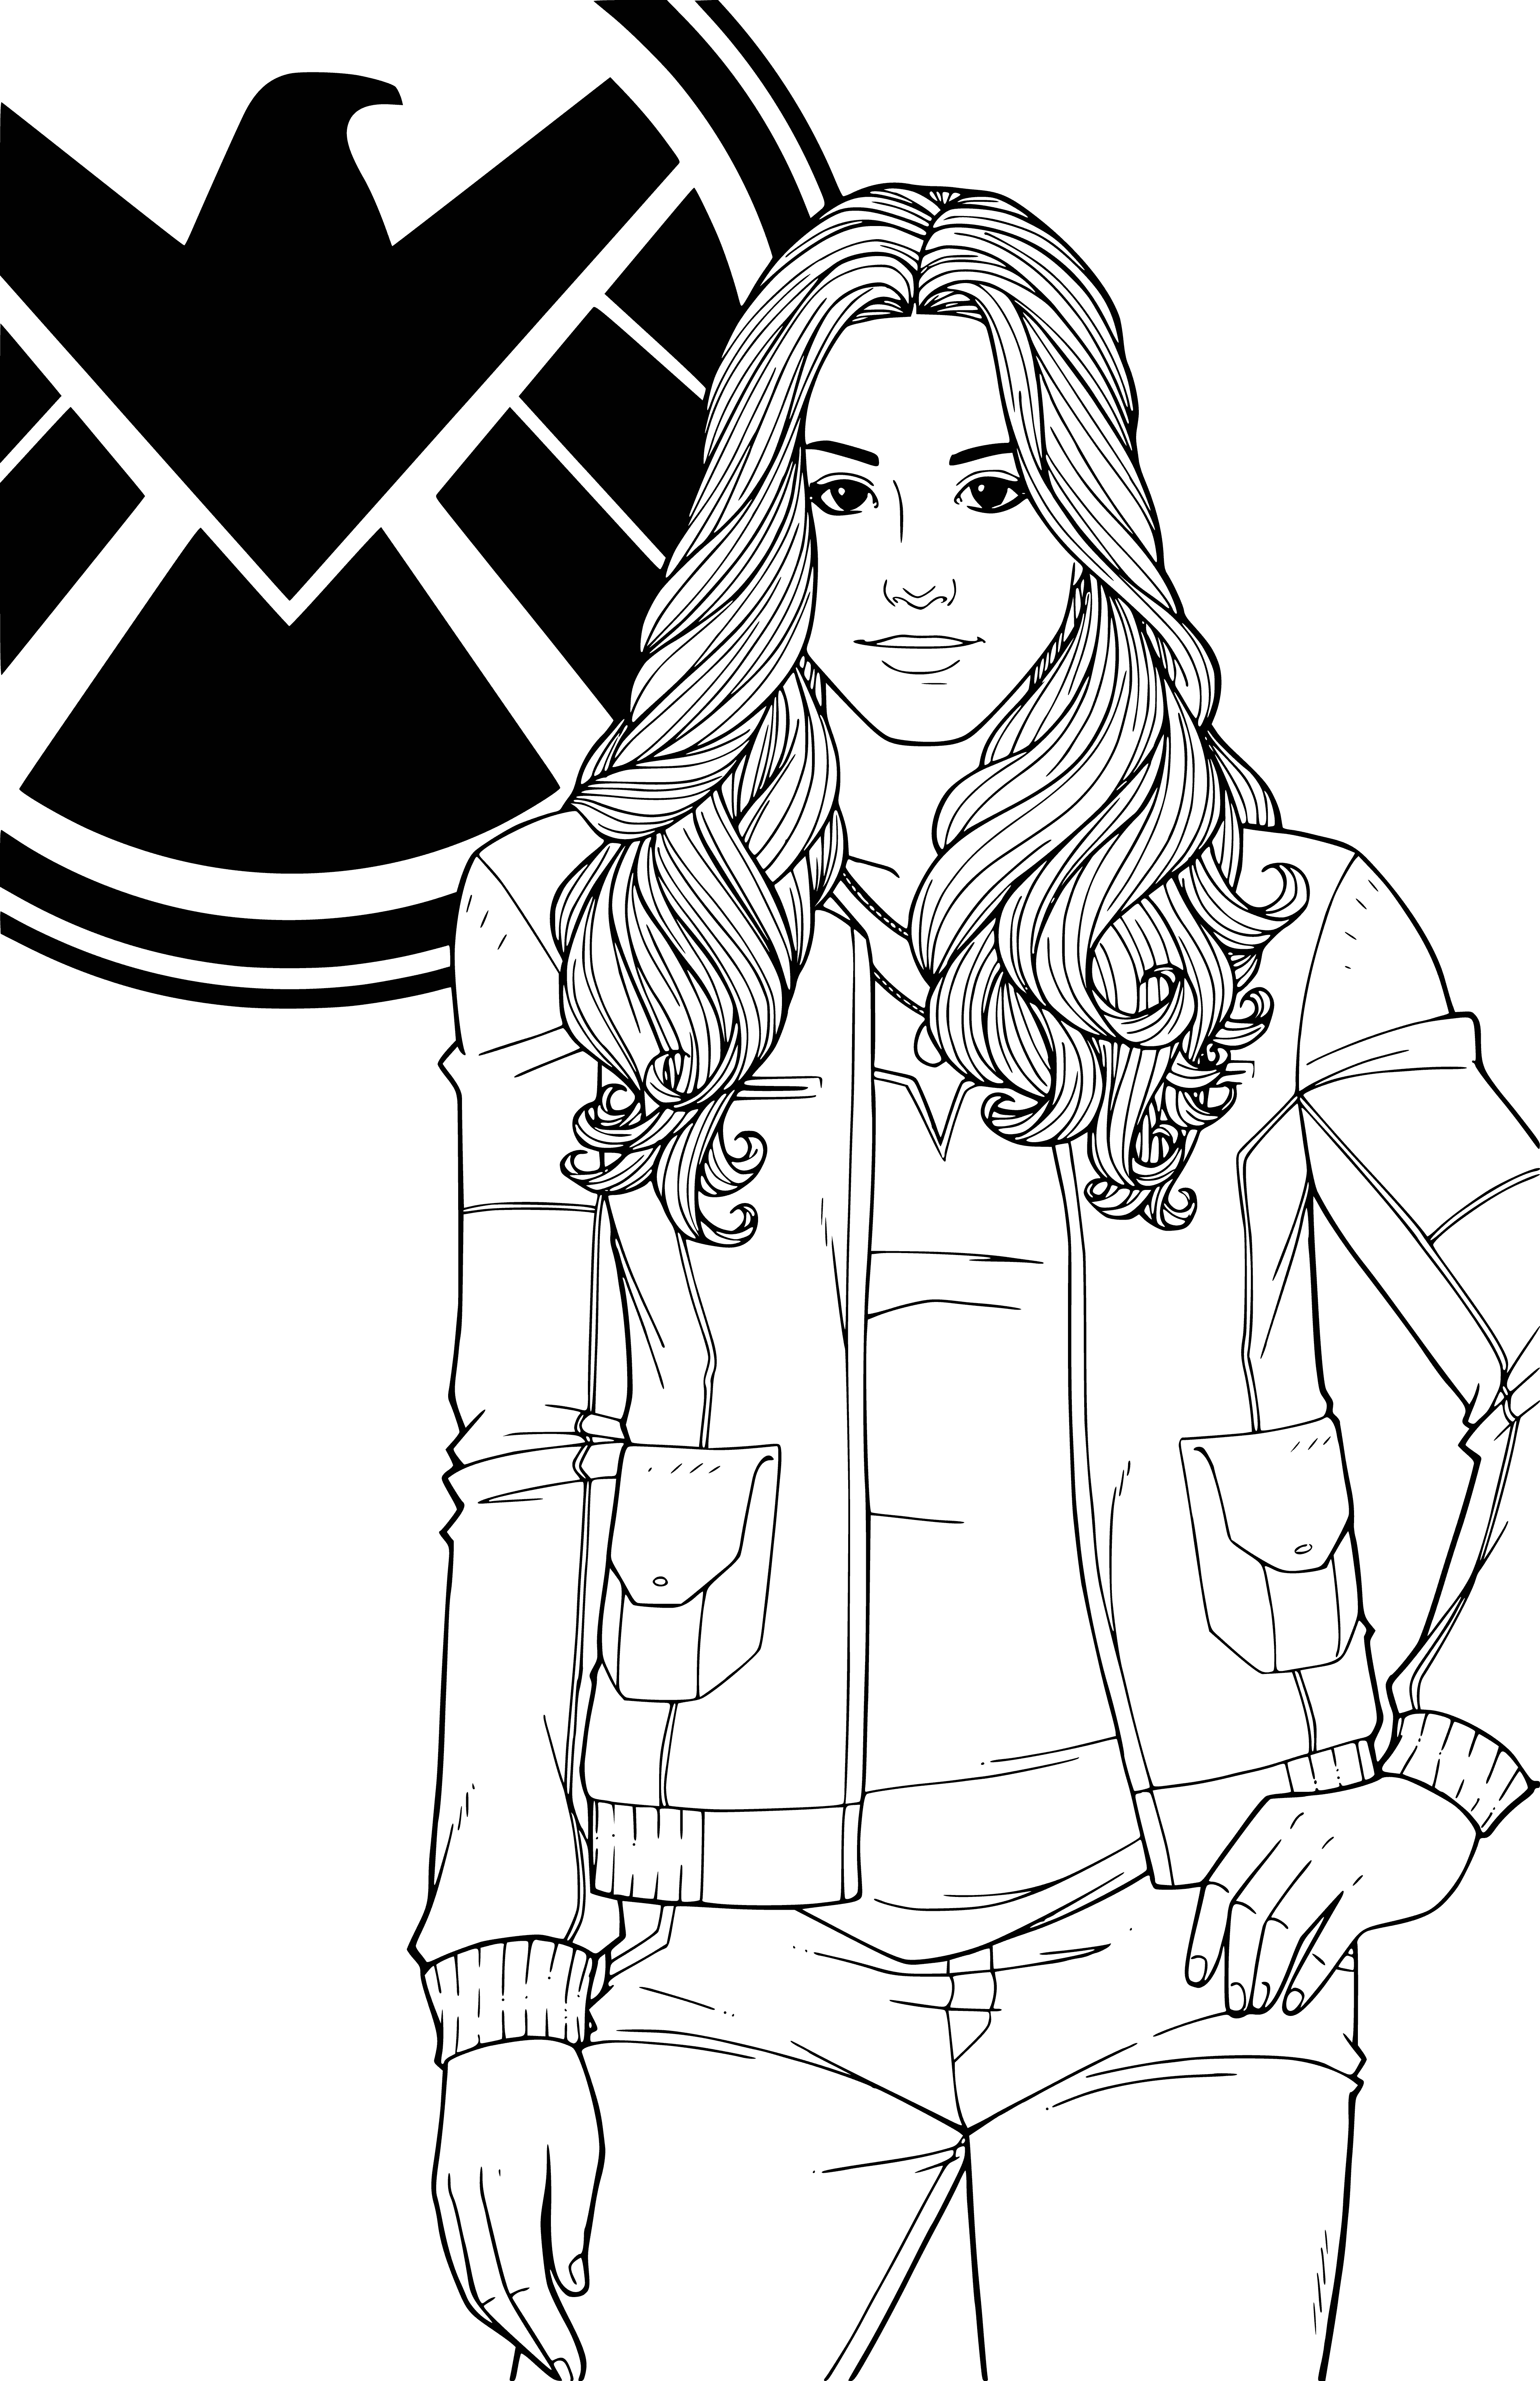 coloring page: Daisy Johnson (Chloe Bennet), an American S.H.I.E.L.D. agent with martial arts and earthquake powers, also known as Quake.